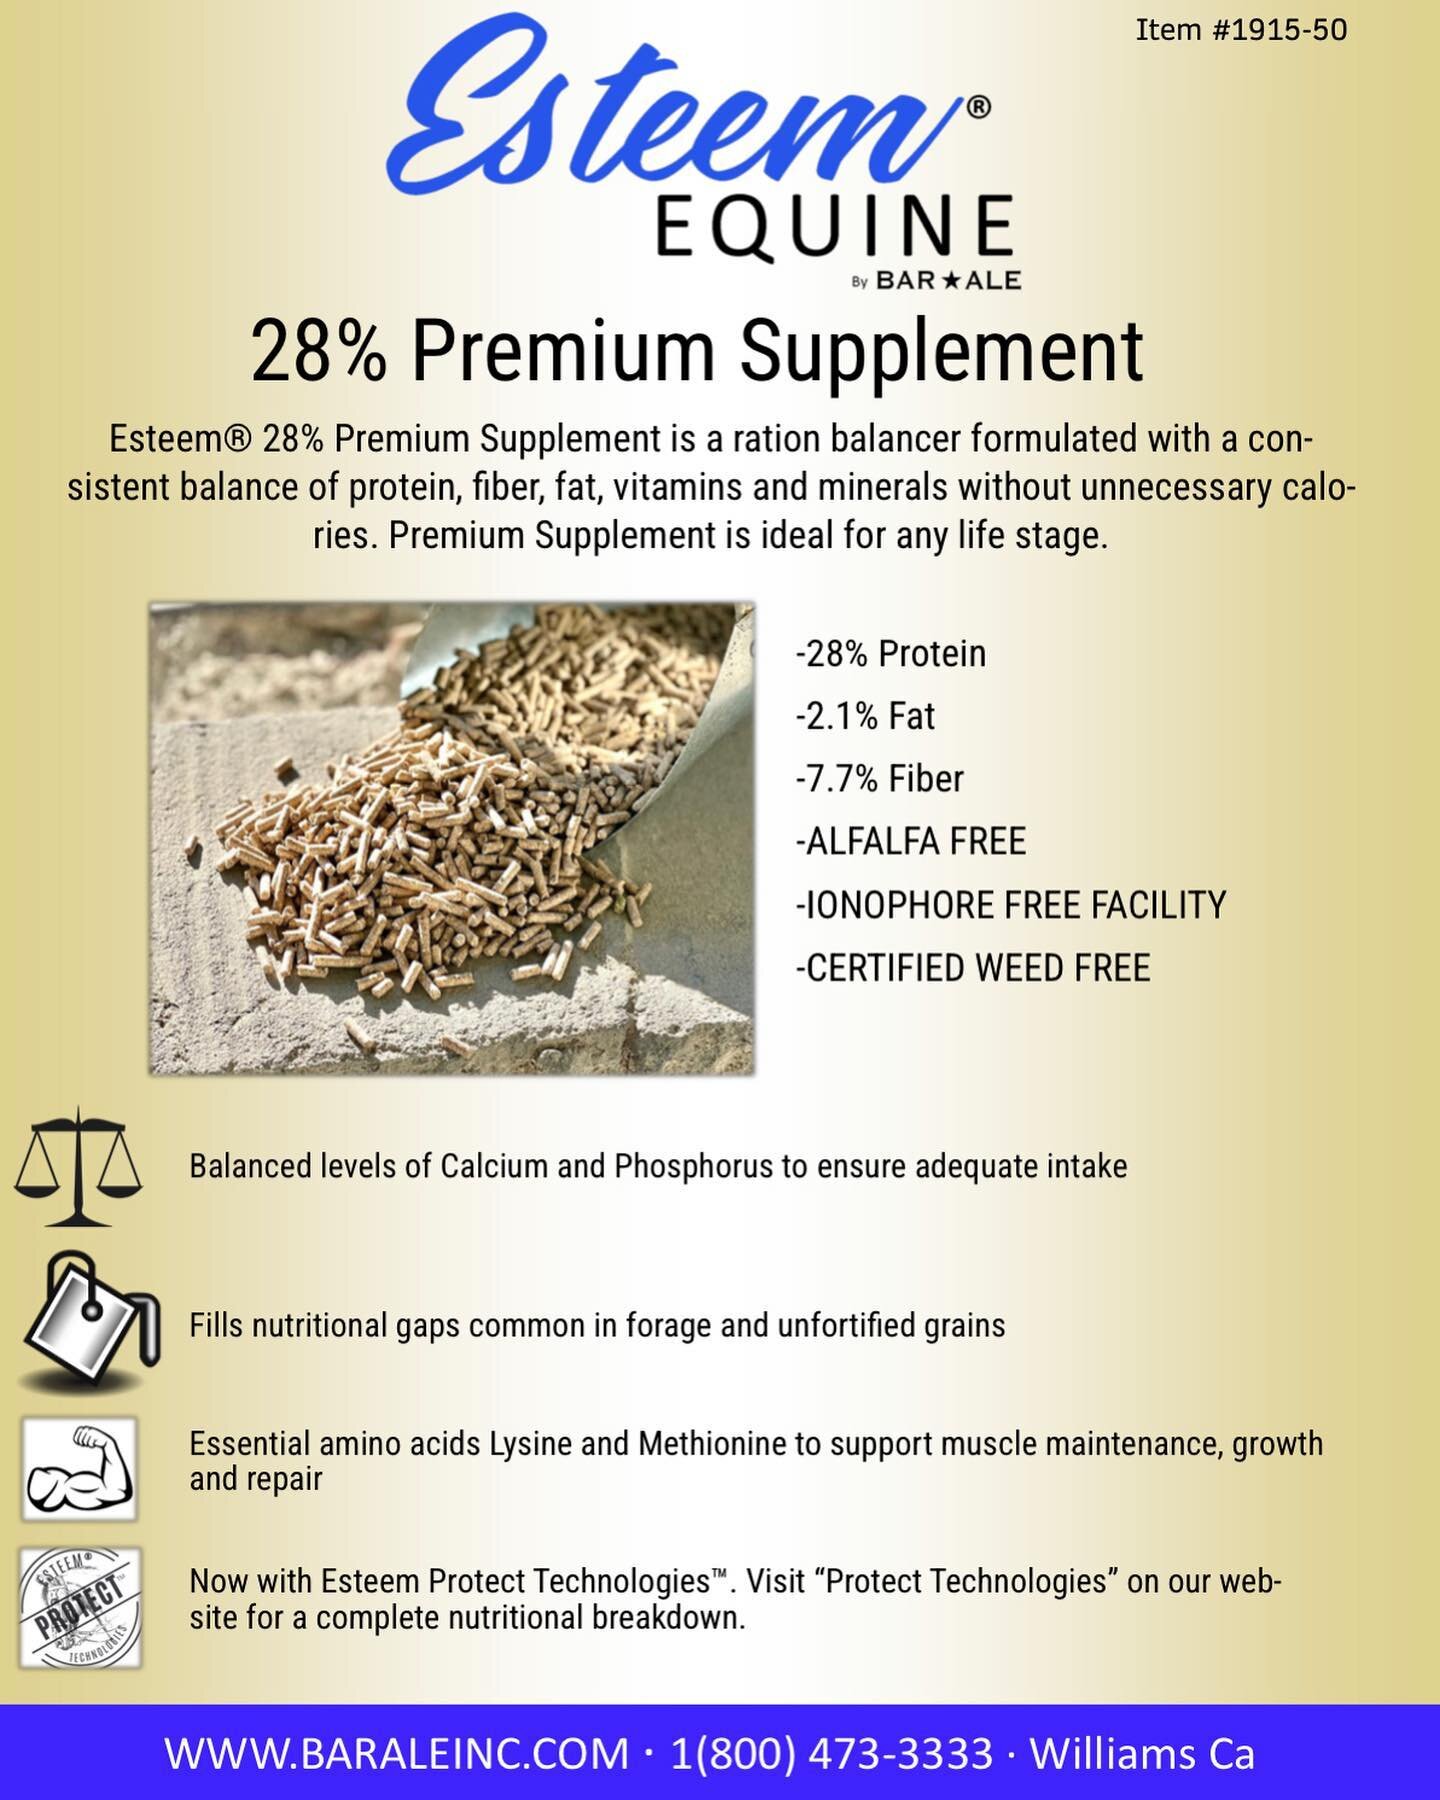 Esteem&reg; Equines 28% Premium Supplement. Order at your local feed store!
#equine #nutrition #equinefeed #horse #livestockfeed #nutrition #horsesofinstagram #horsefeed #livestockfeed #premium #quality #premiumsupplement #barale